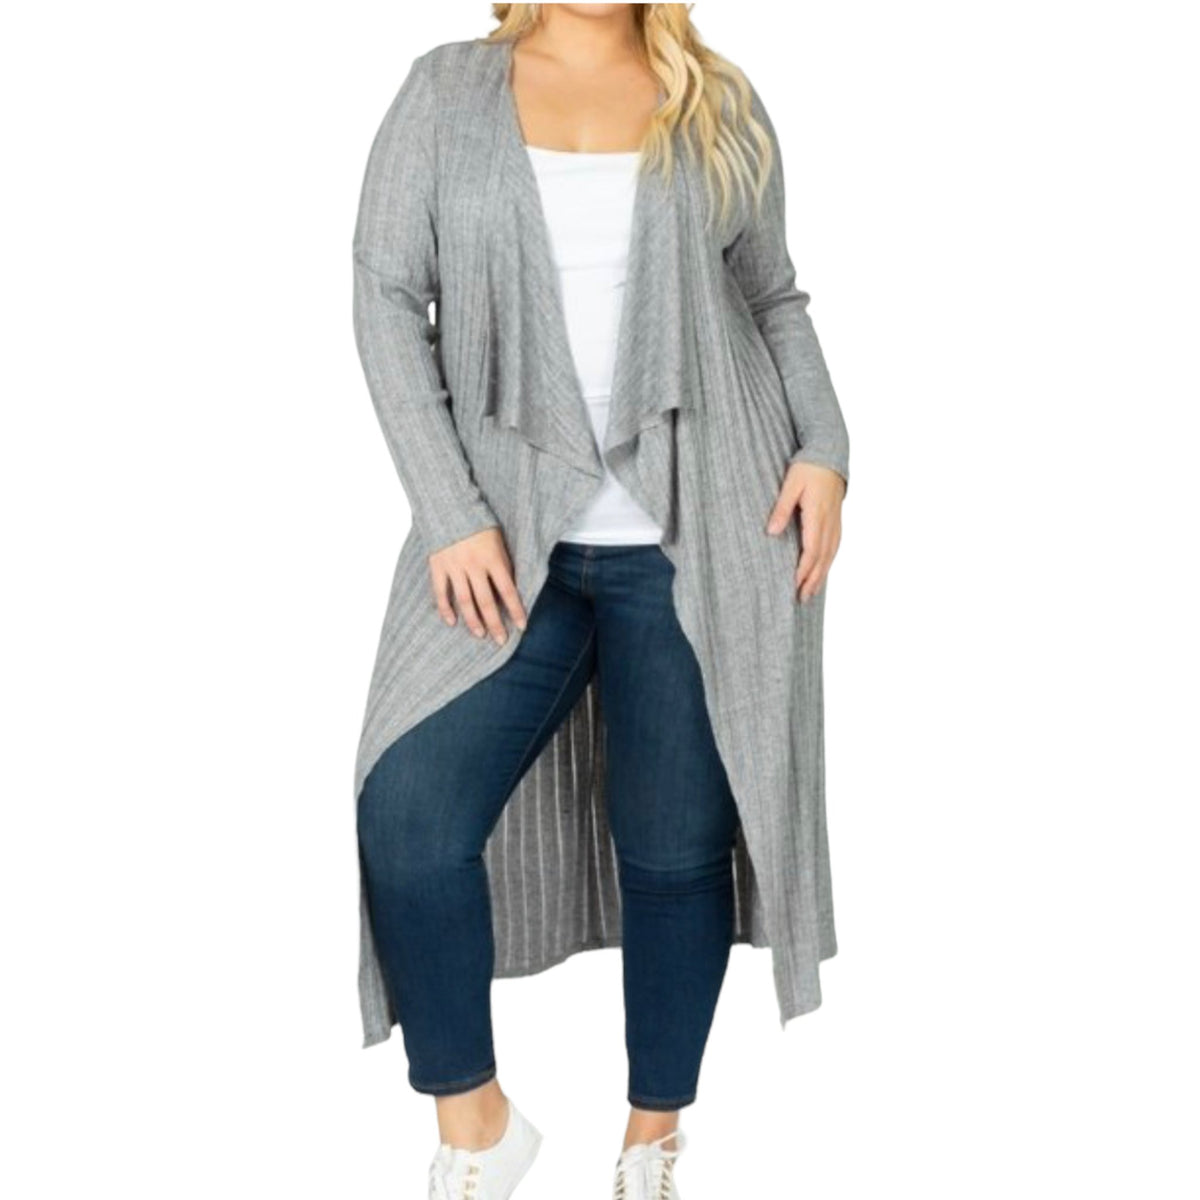 Women’s Long Sleeve Knotted Back Midi Cardigan - Fabulously Dressed Boutique 